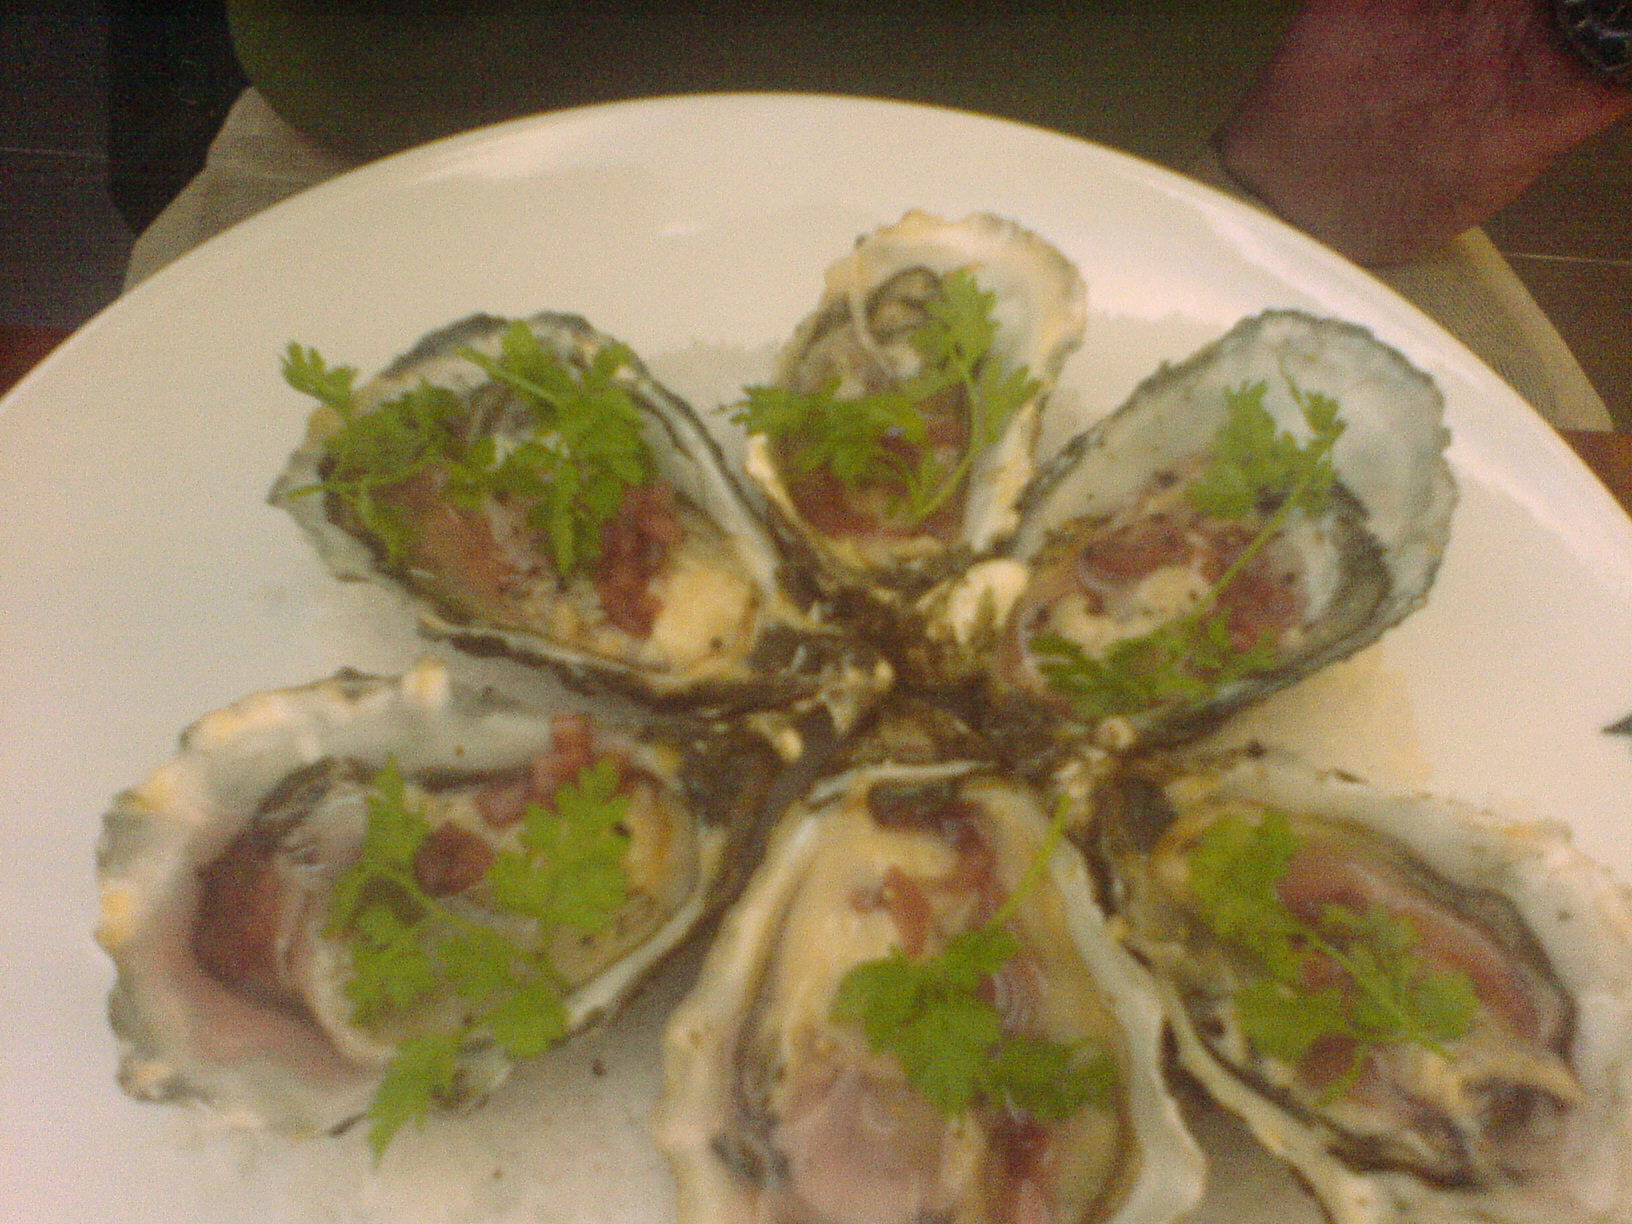 some oysters are in an arrangement on a plate